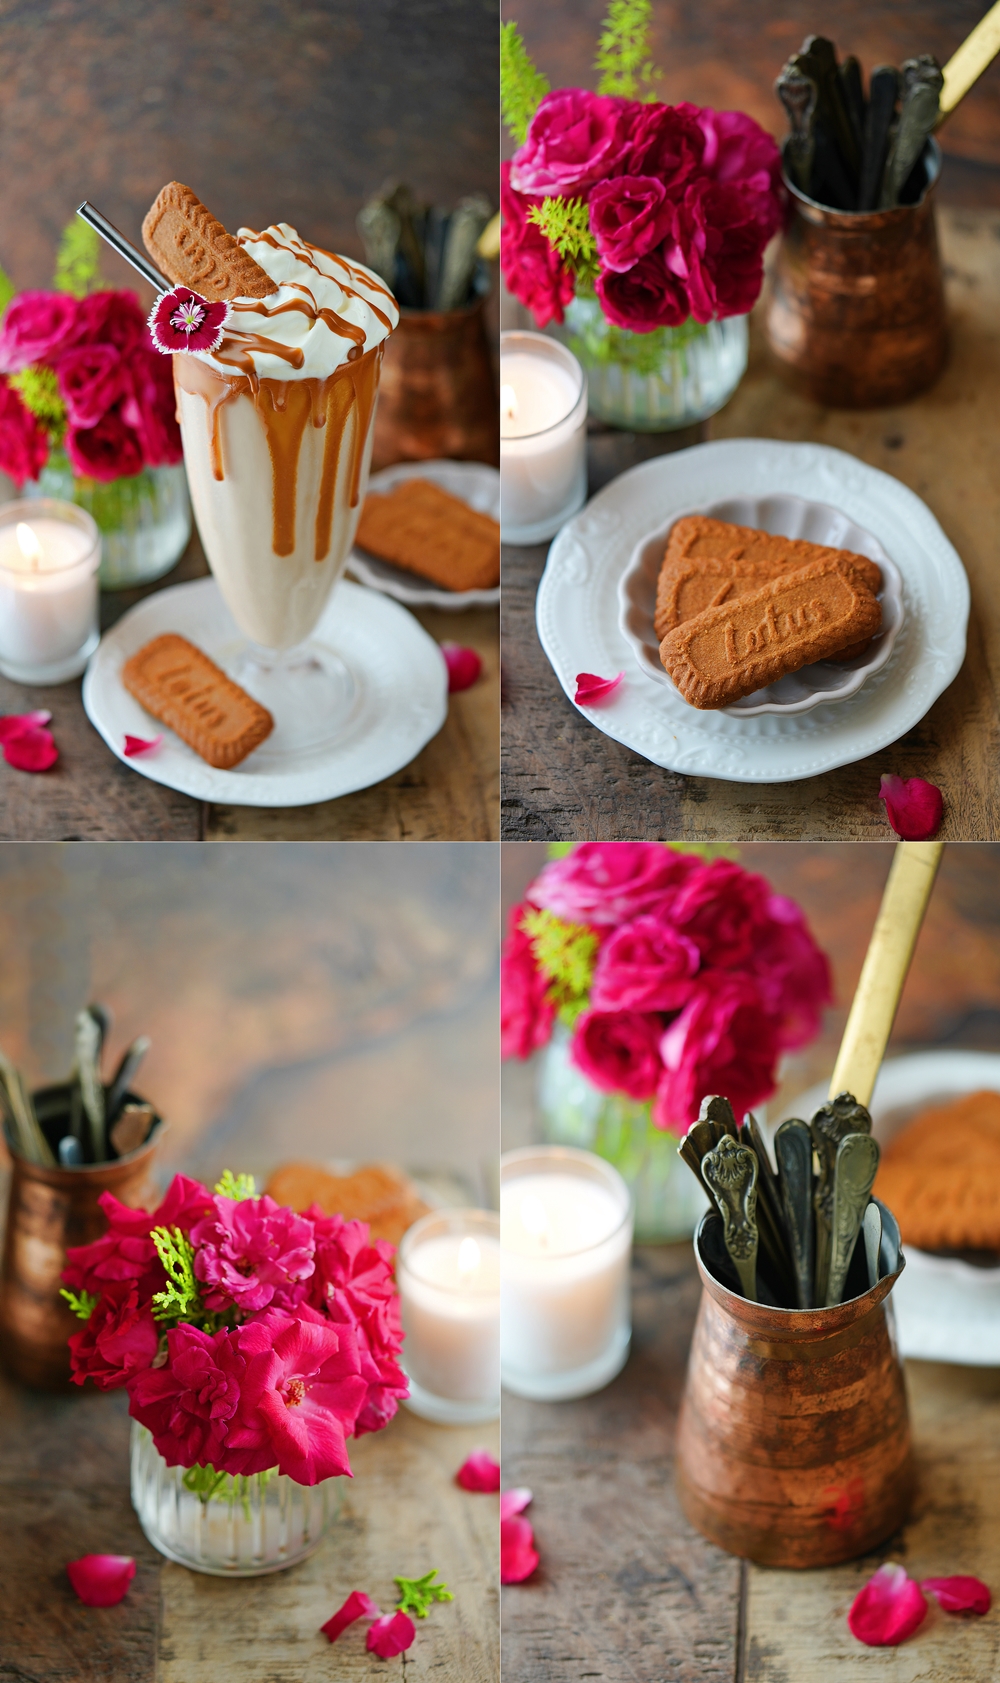 Deliciously Addictive Lotus Biscoff Dessert Box  what's not to love ♥! -  Passionate About Baking